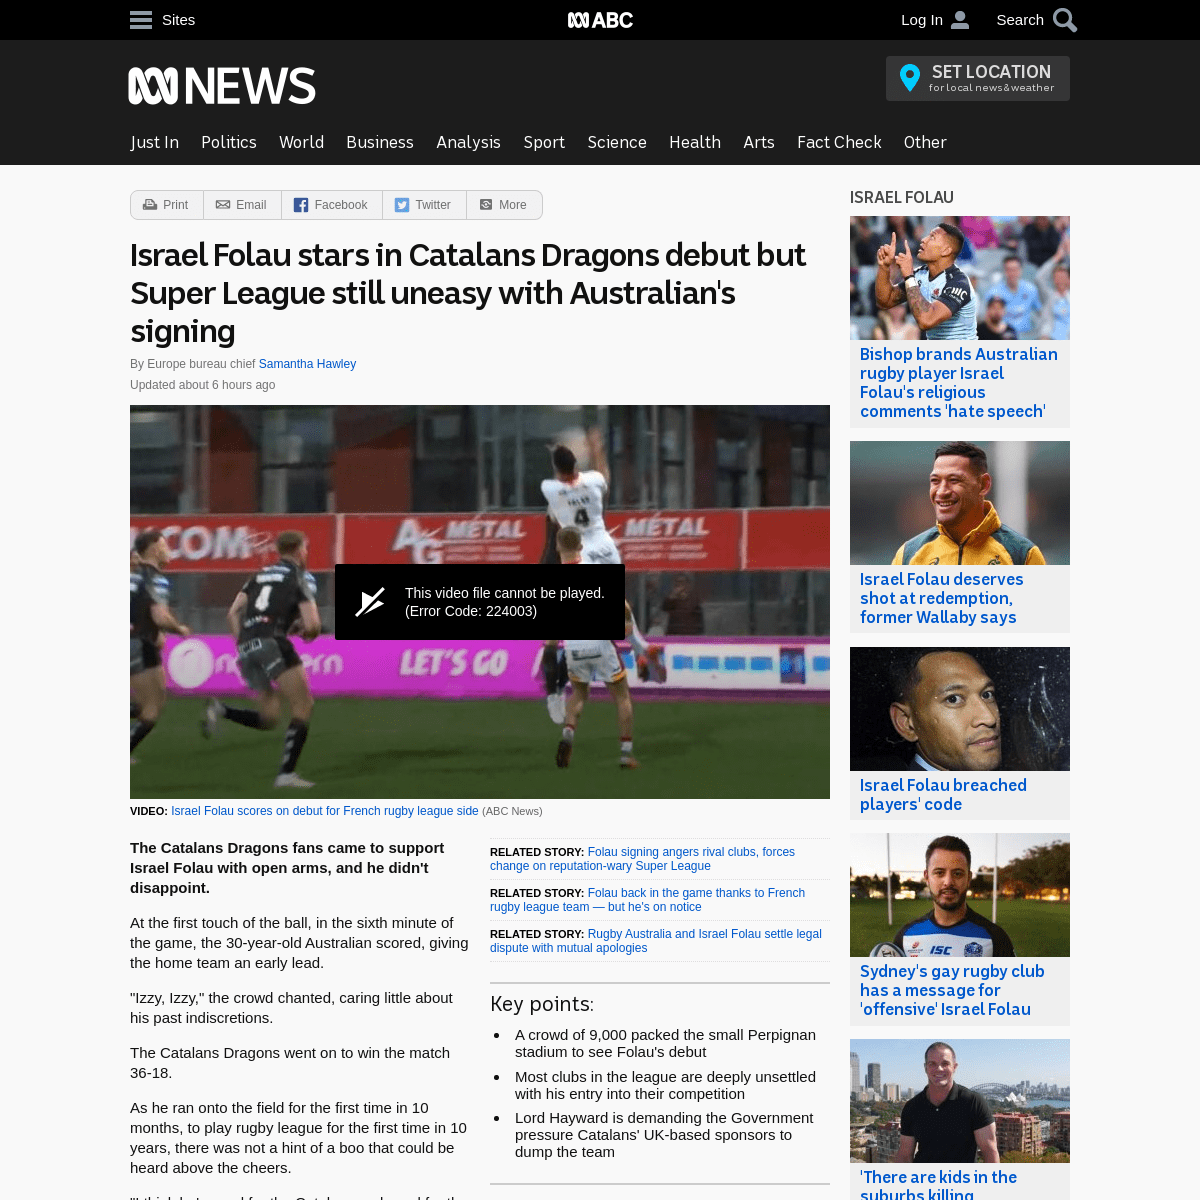 A complete backup of www.abc.net.au/news/2020-02-16/israel-folau-makes-catalans-dragons-debut-in-france/11968564